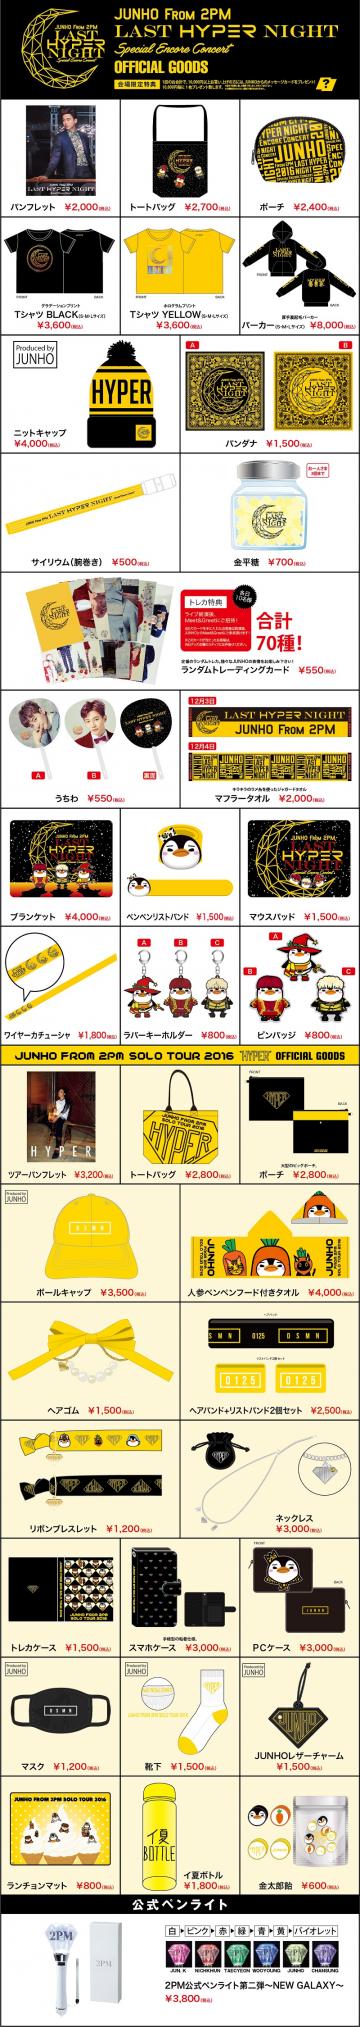 2PMジュノ グッズ - whirledpies.com